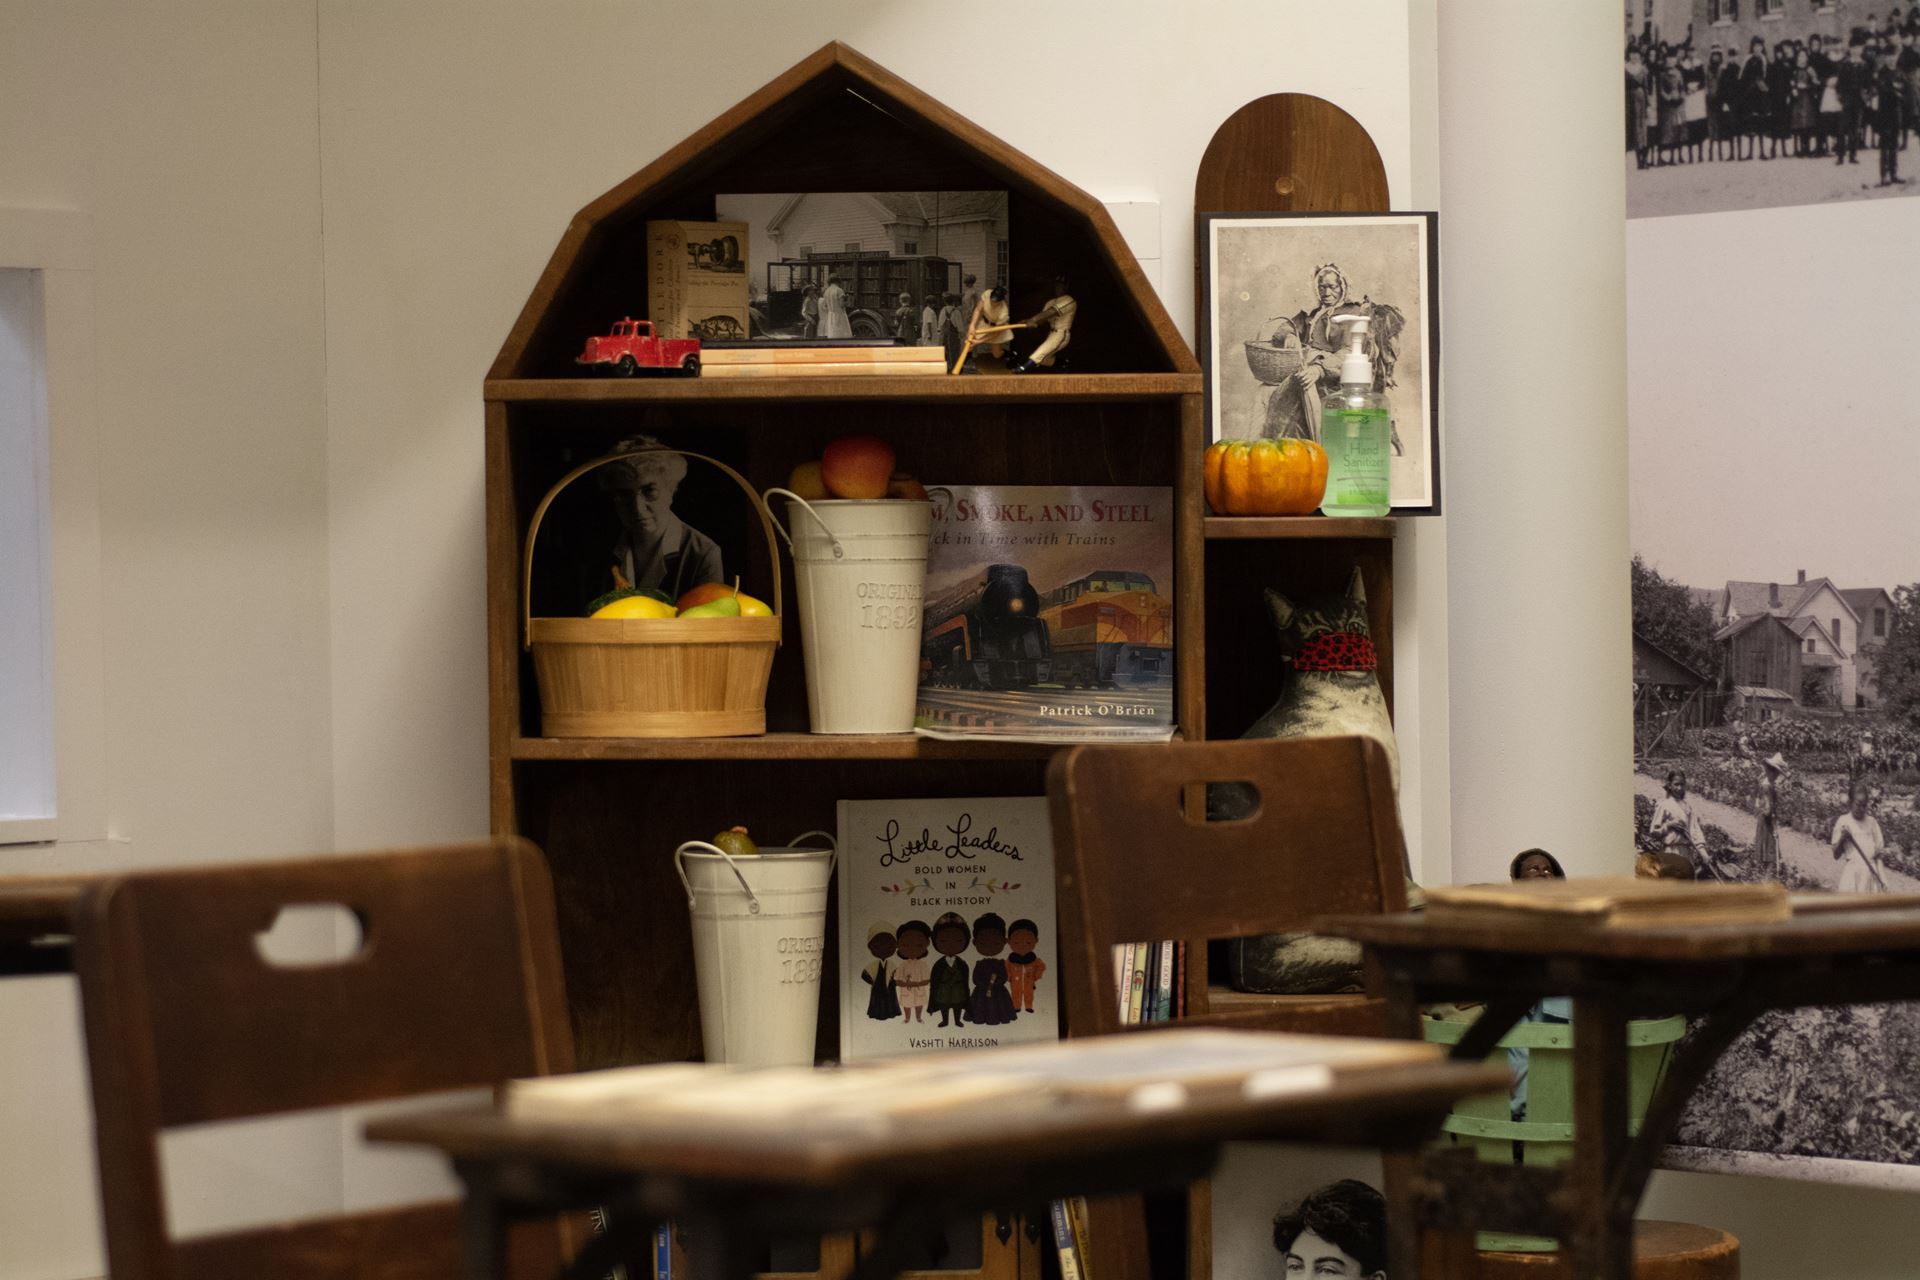 A small rectangular image of the desks and shelves in the Children's Educational Area.